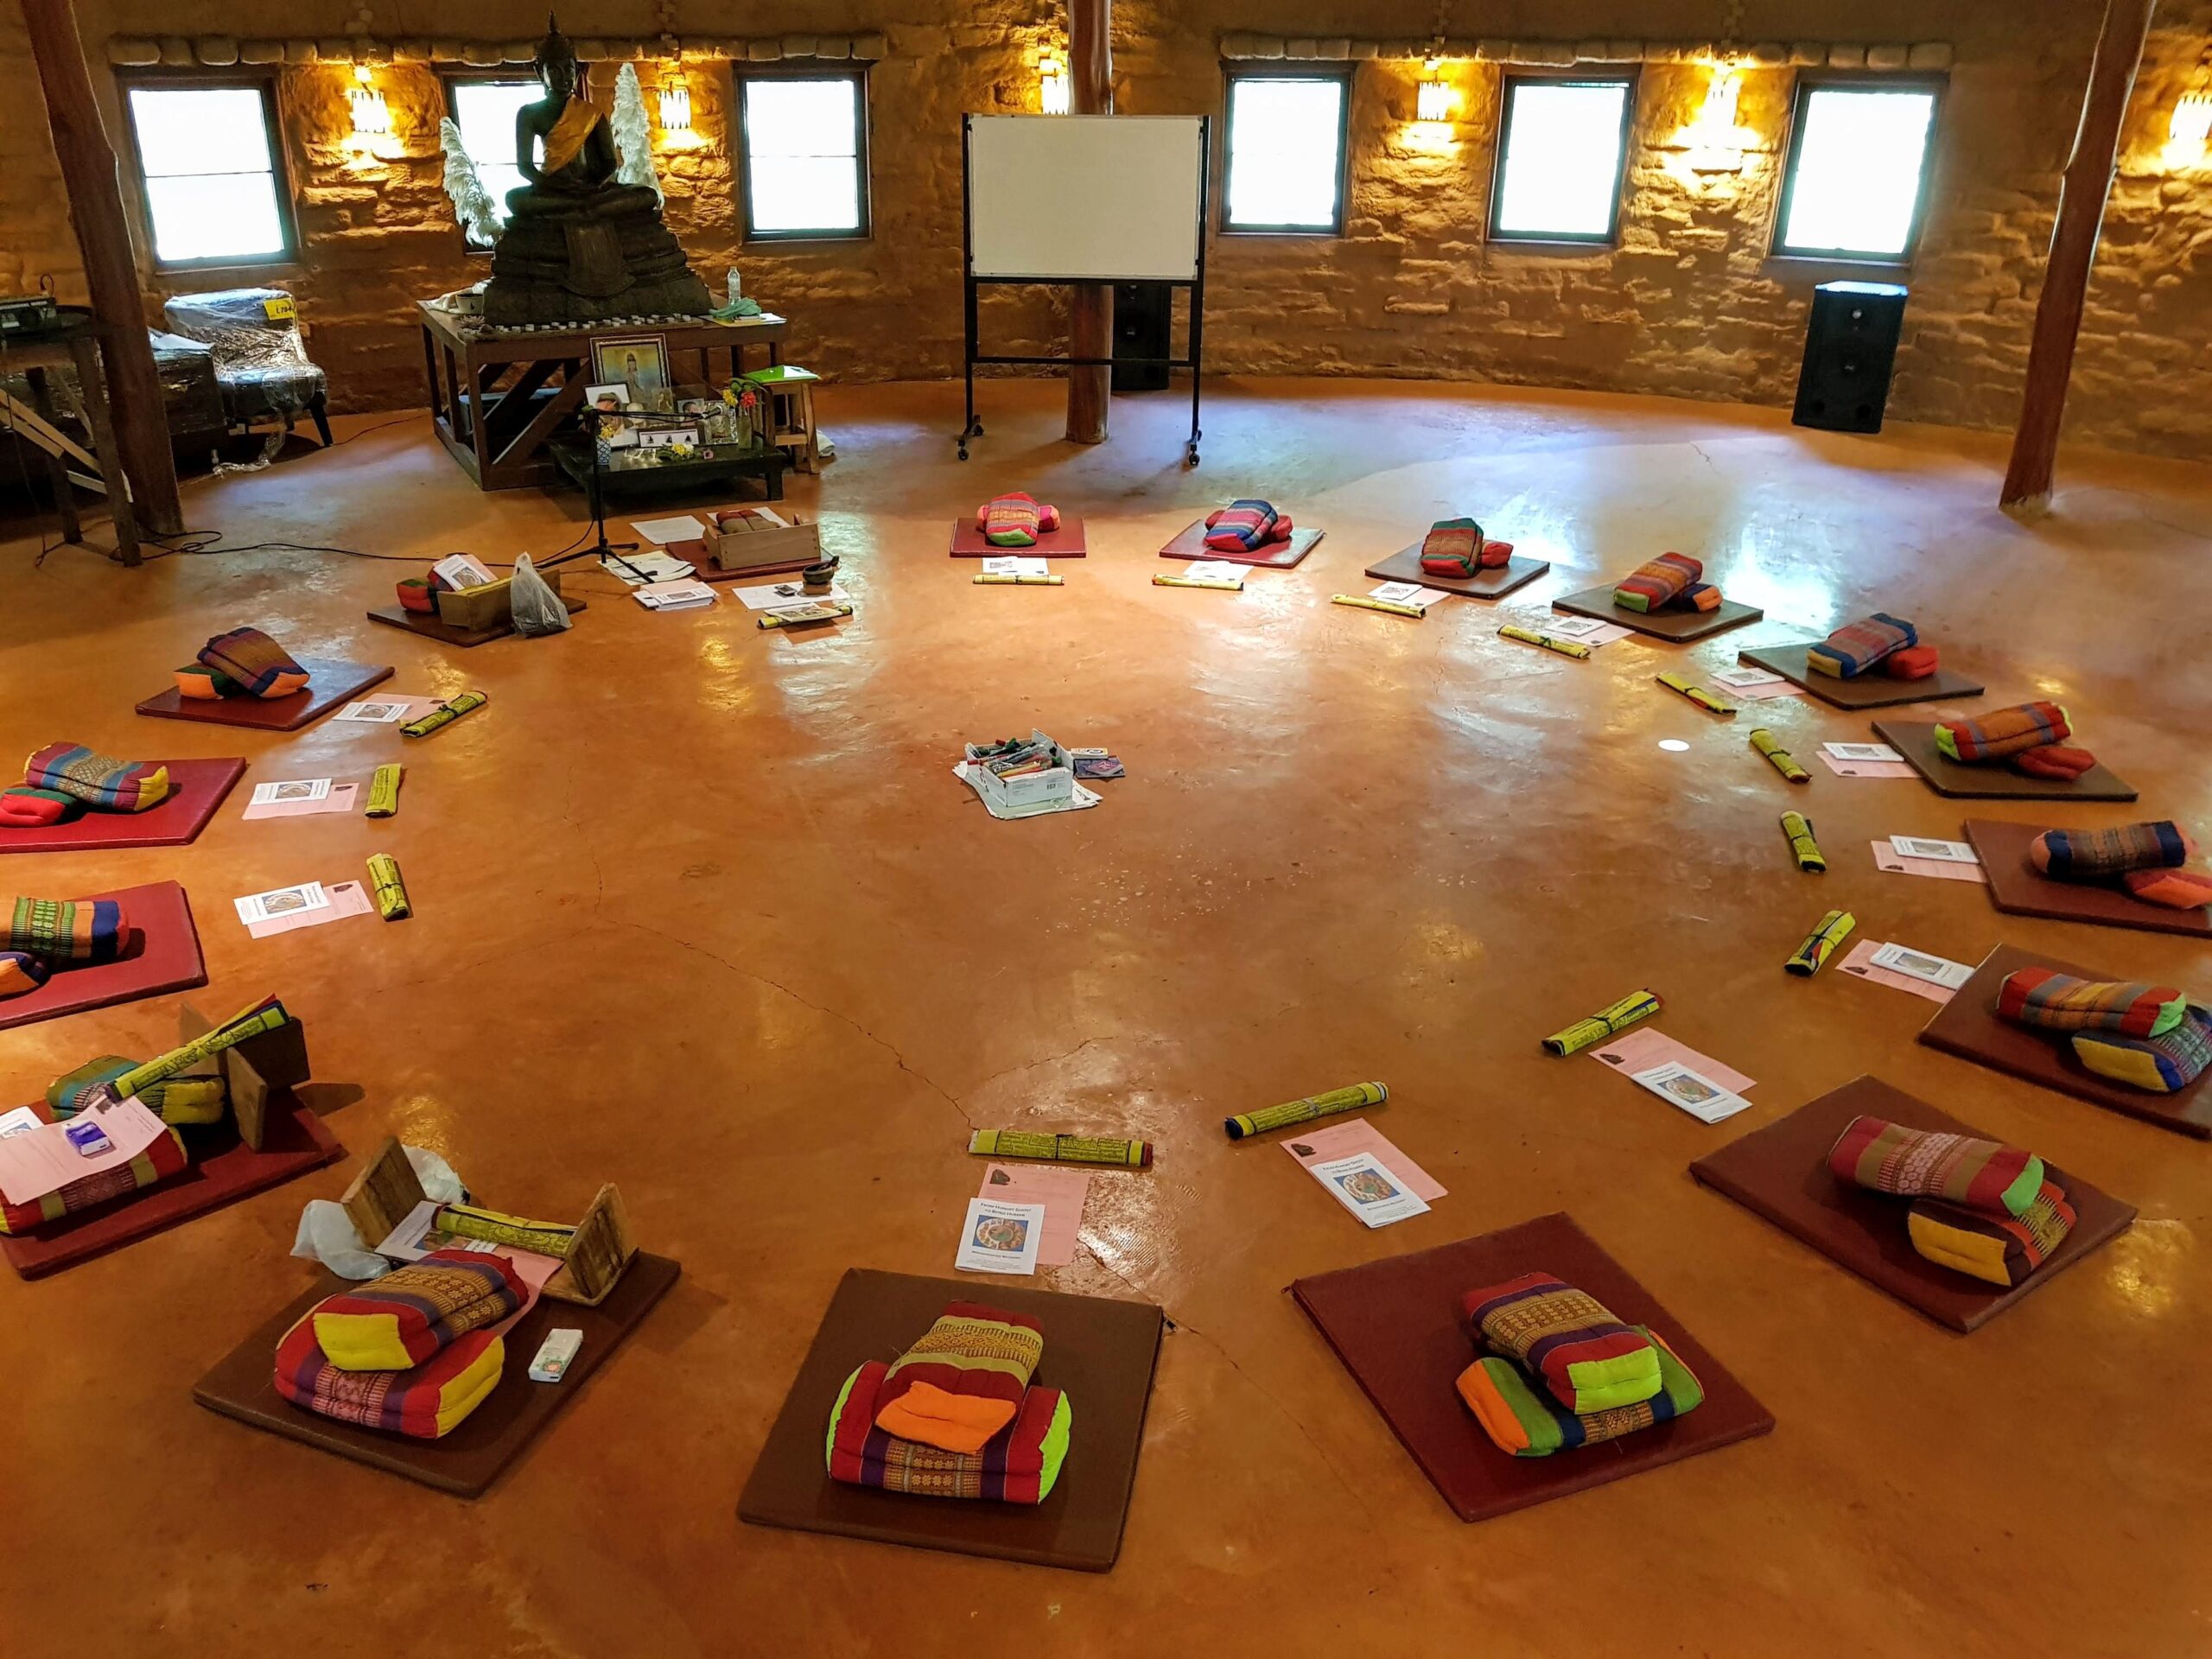 Meditation Hall set out with mats and cushions.